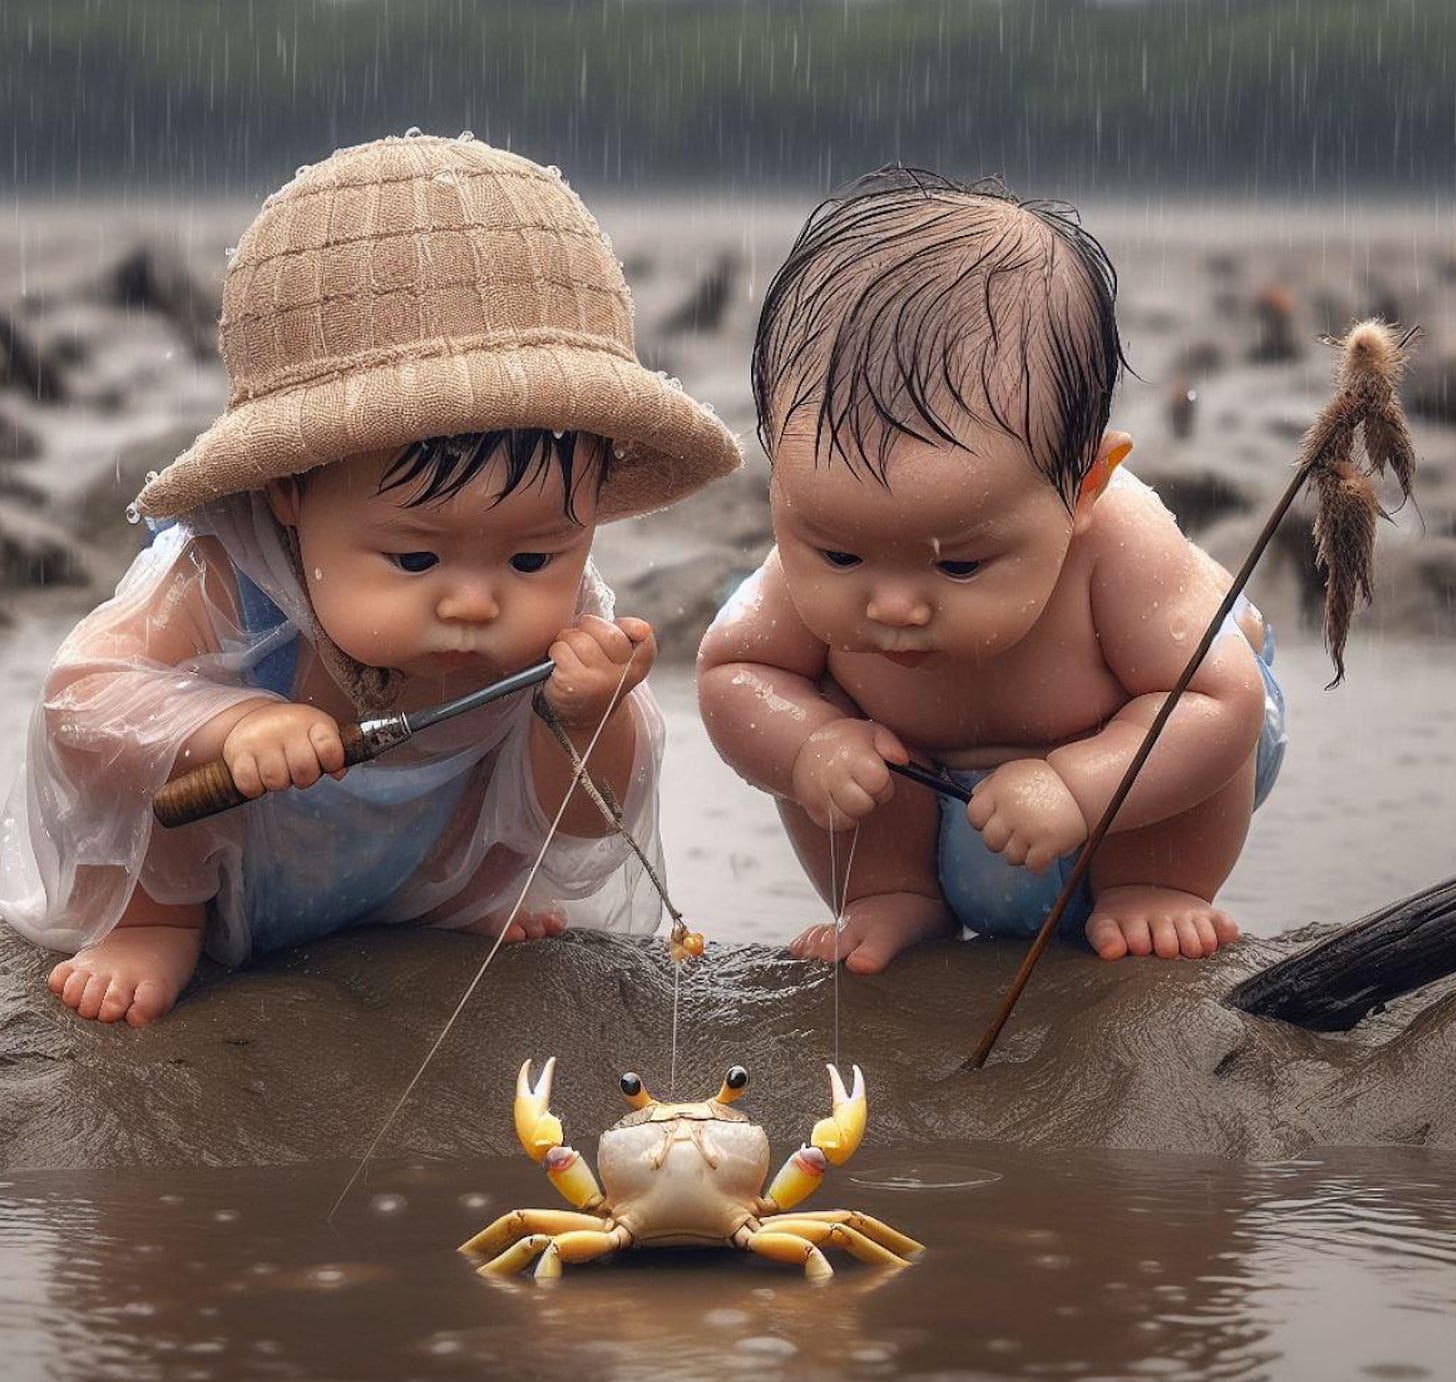 An AI generated image showing two babies staring at a crab that's staring back at them